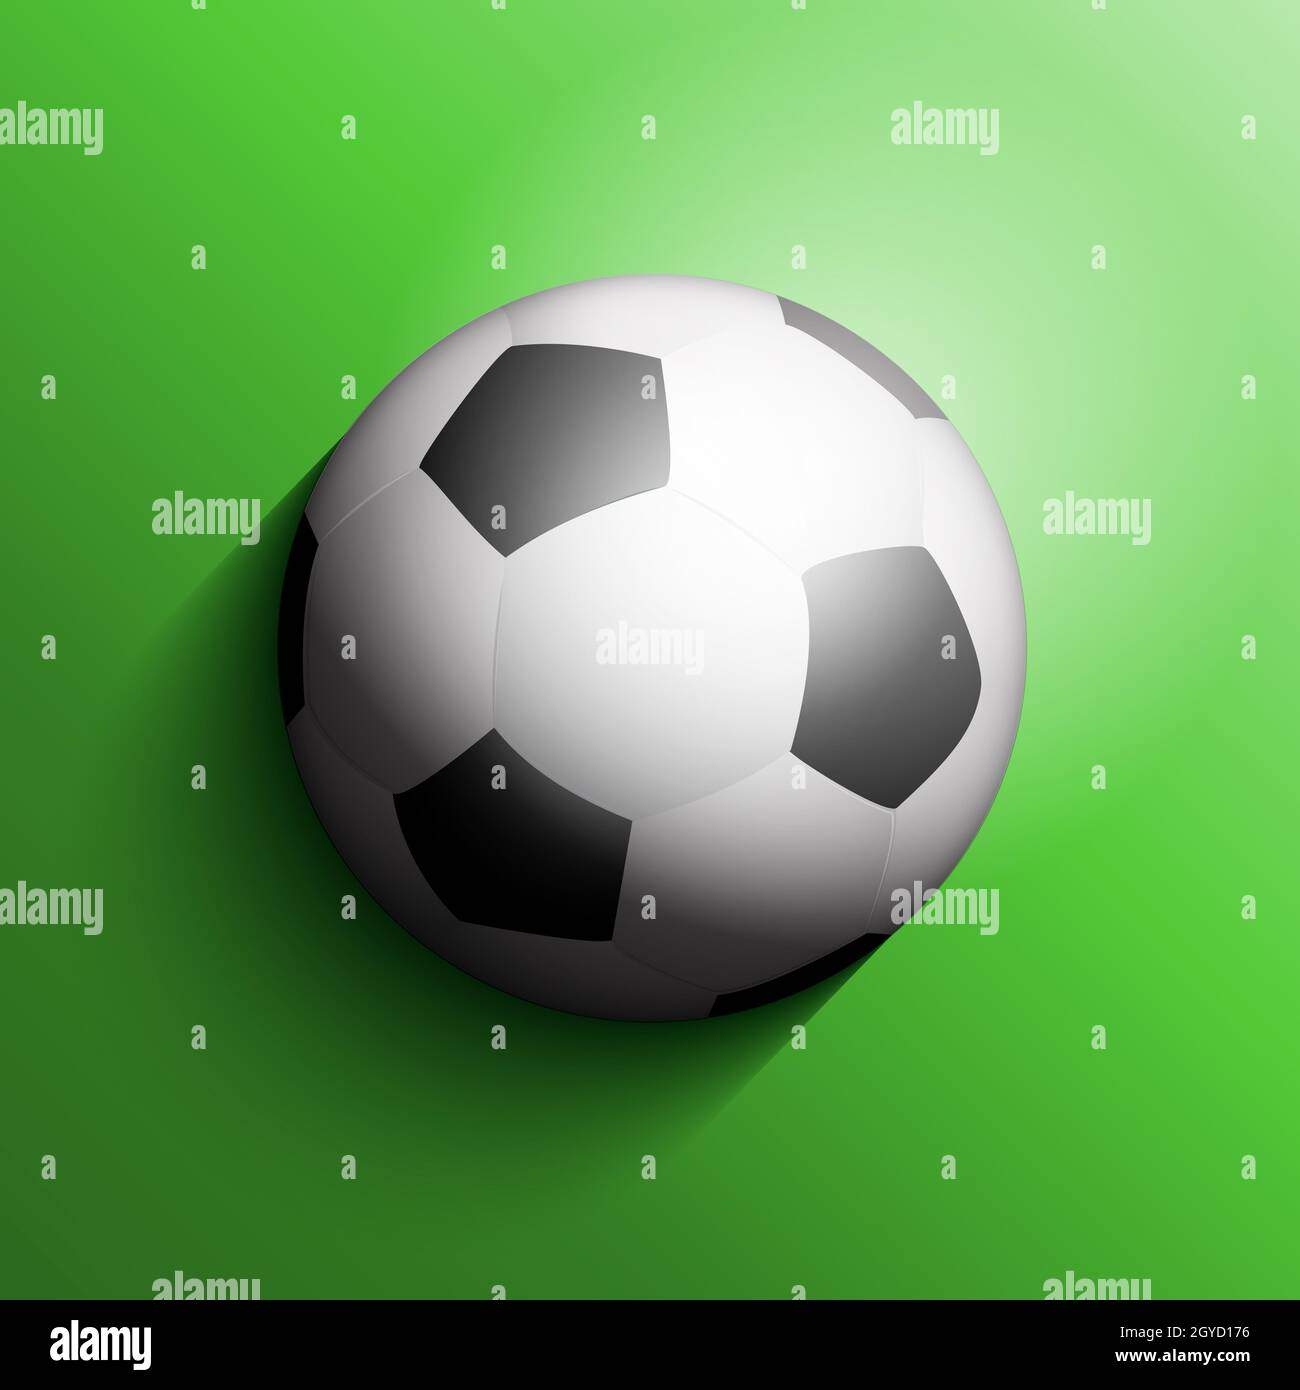 Soccer or football simplistic design background Stock Photo